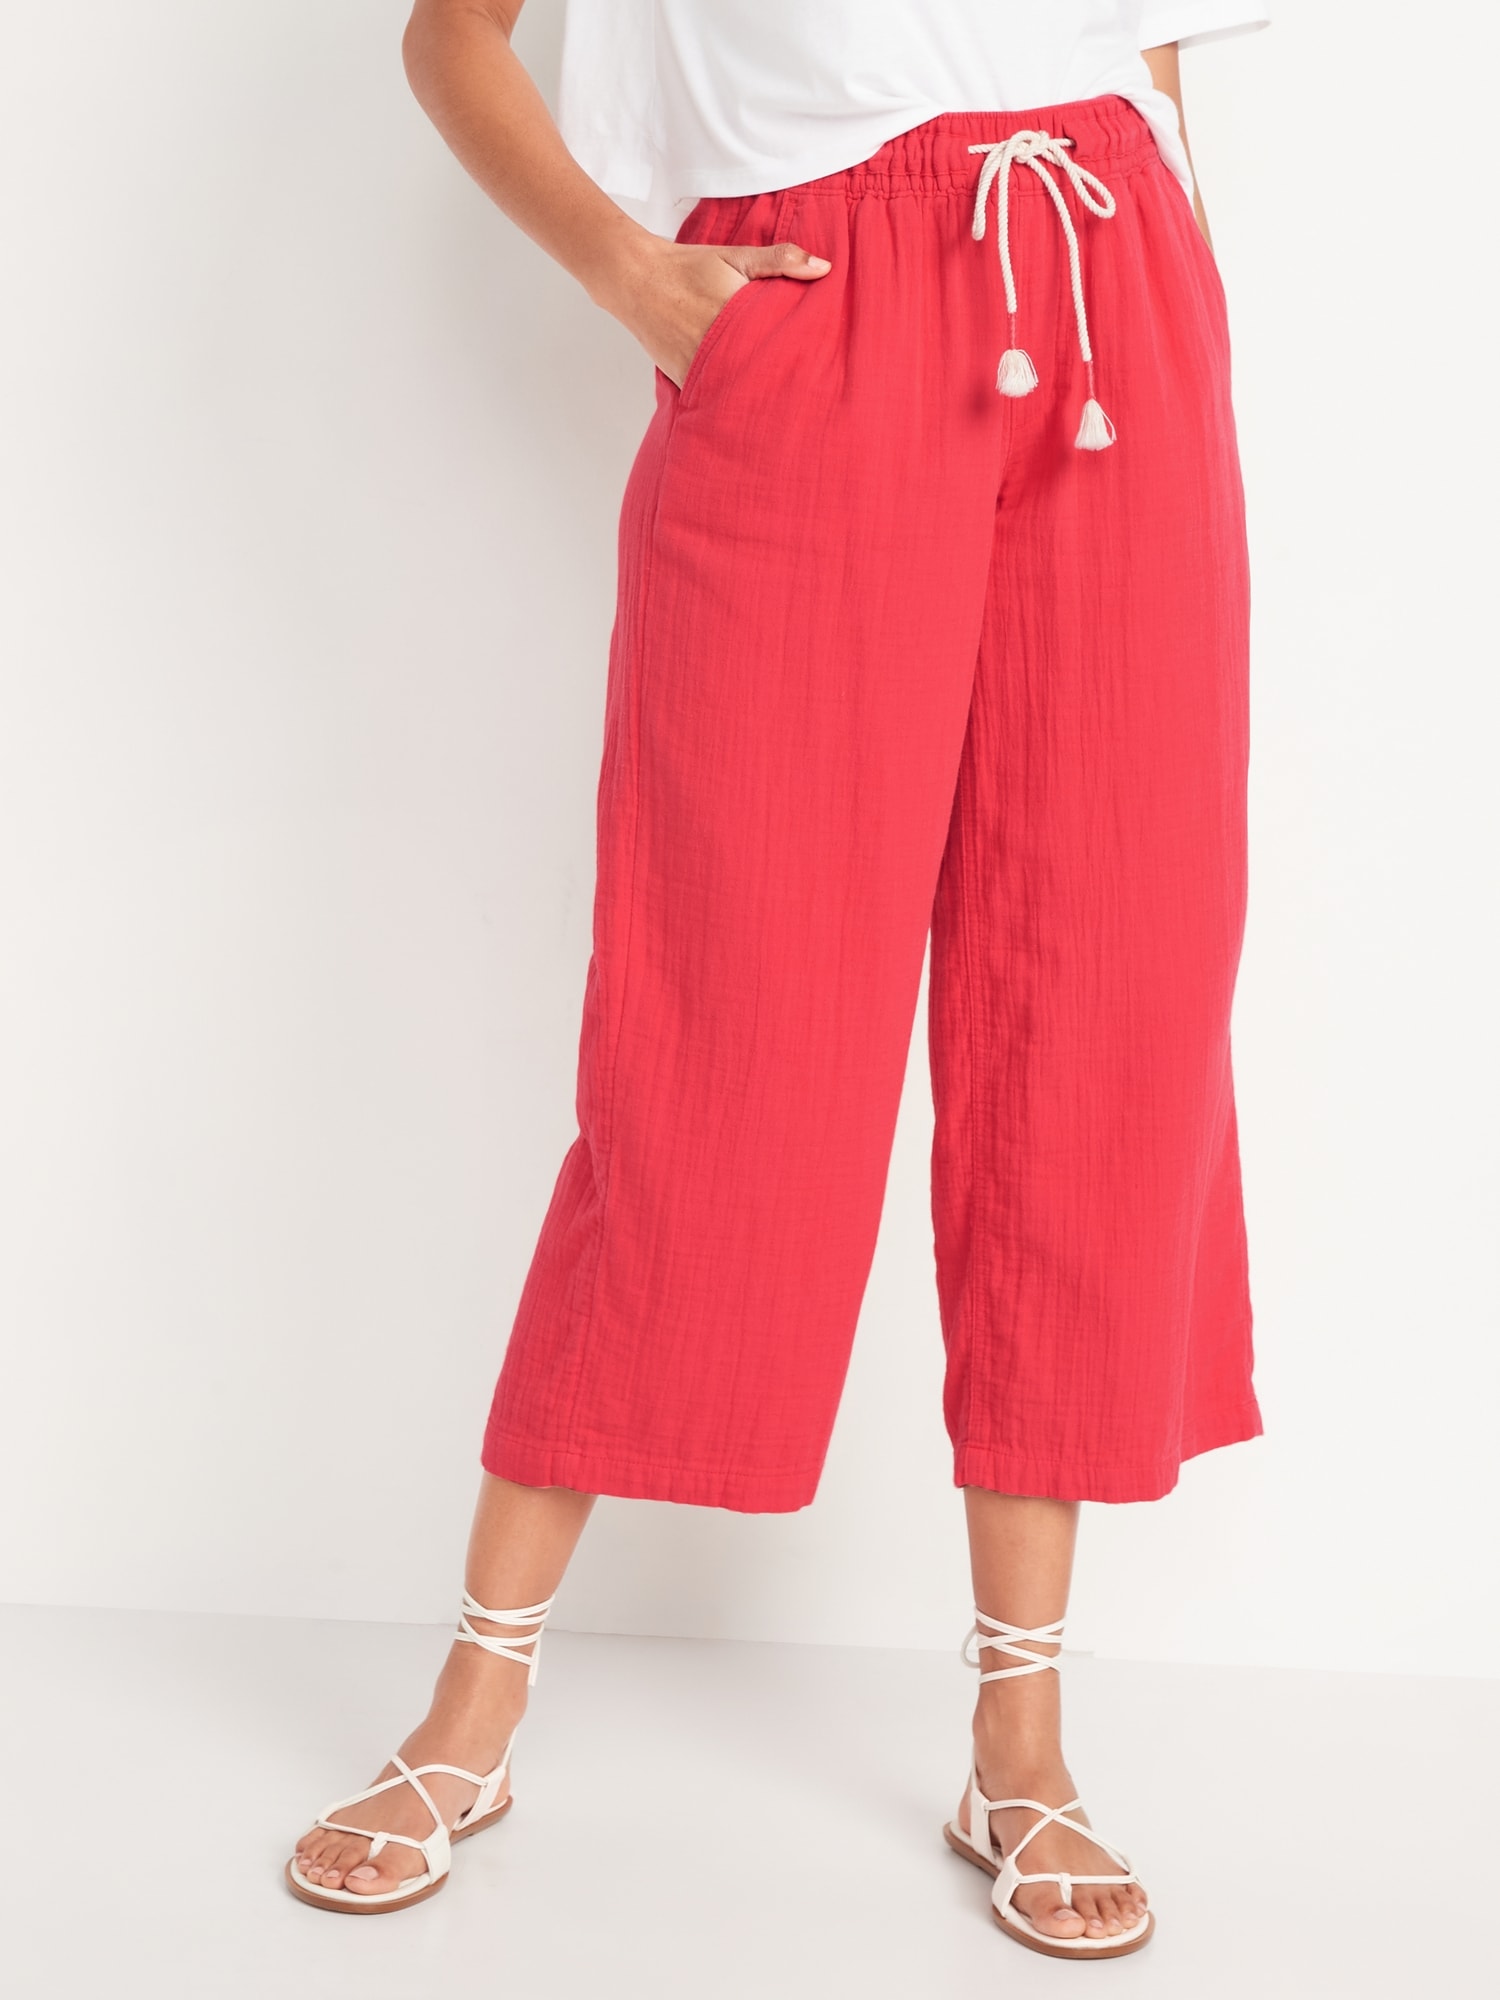 High-Waisted Textured Soft Pants for Women | Old Navy